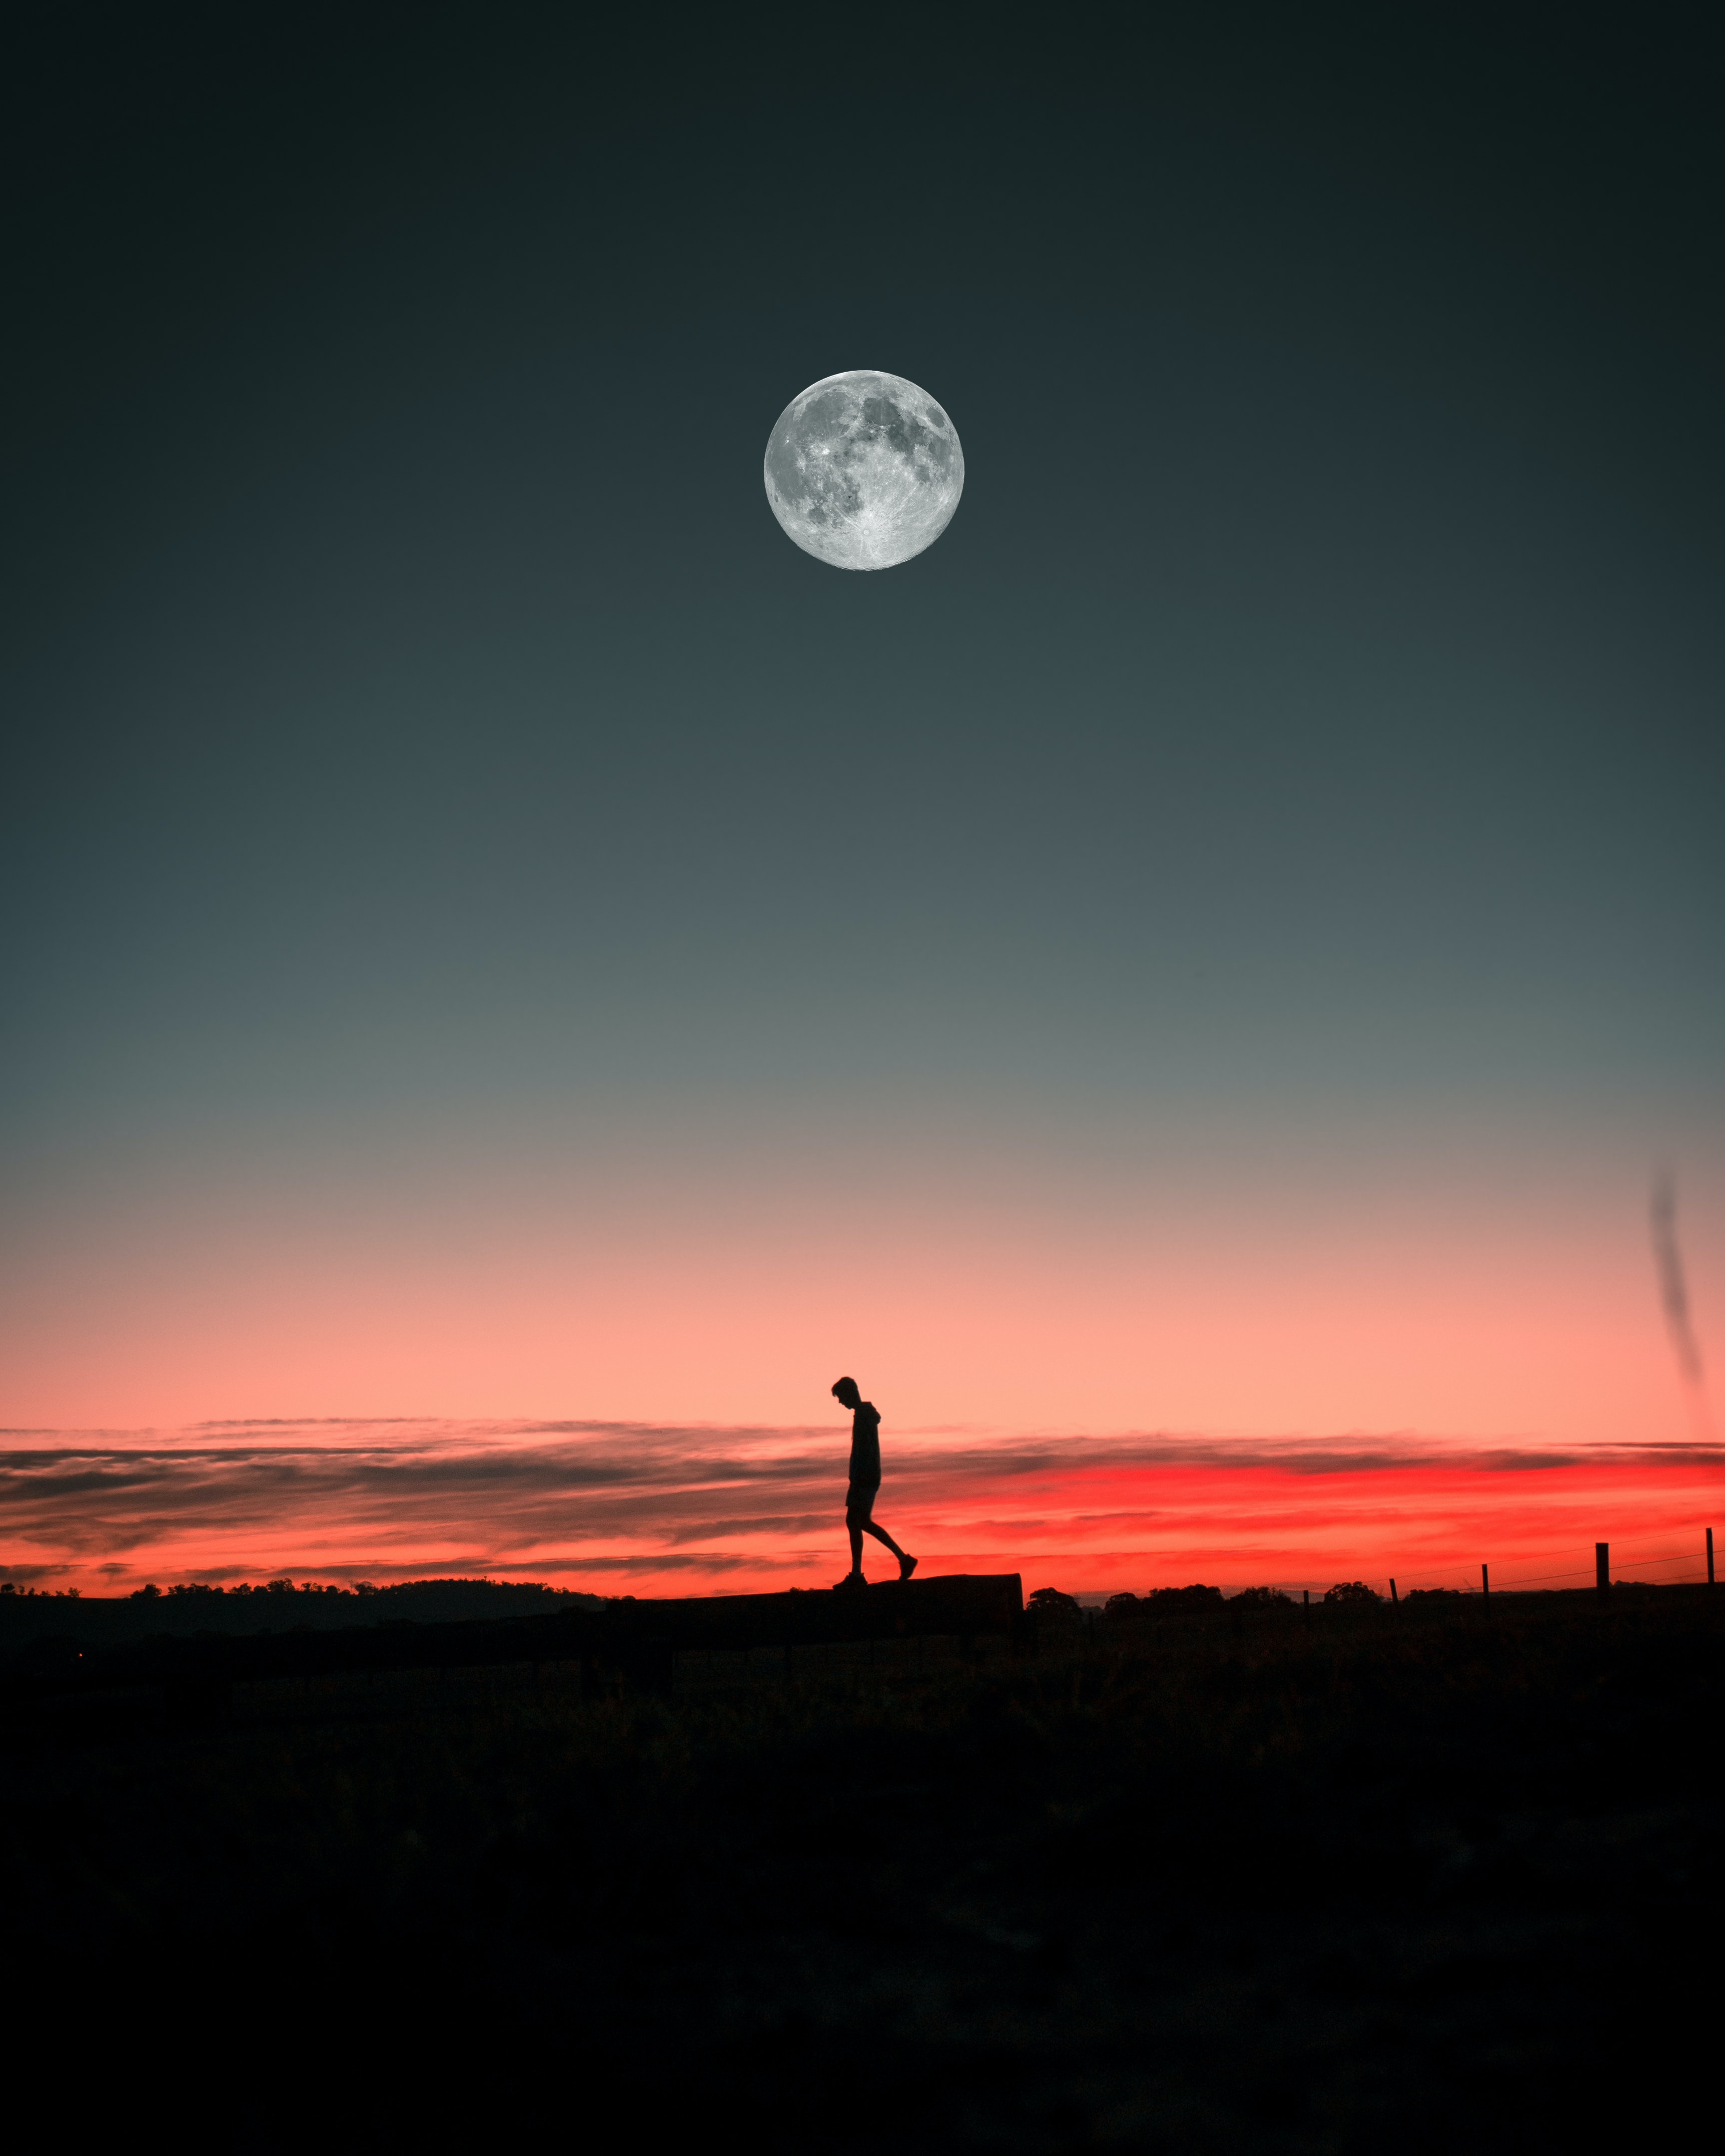 alone, moon, lonely, sunset, silhouette, miscellanea, miscellaneous, loneliness